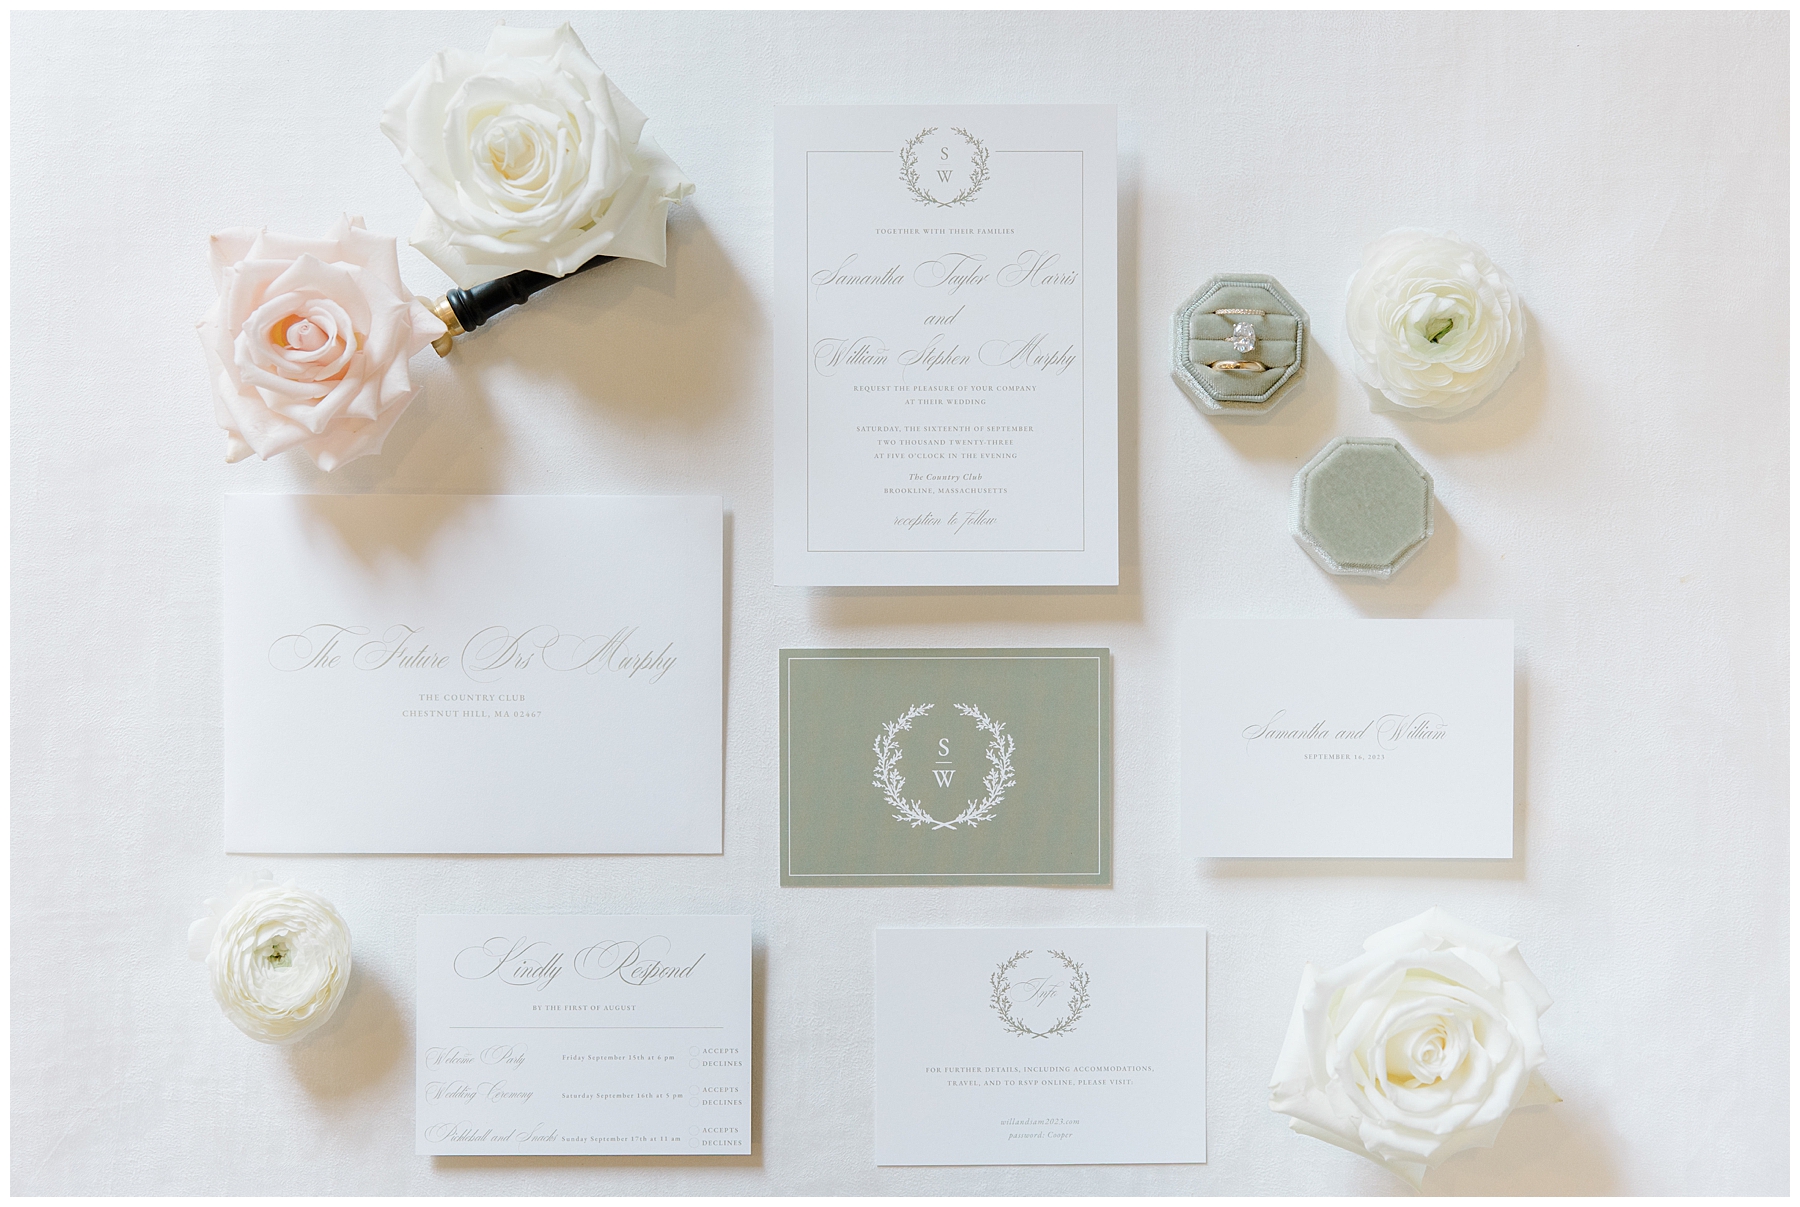 wedding invitation and flatlay inspiration from romantic floral centered wedding at The Country Club in Brookline, MA